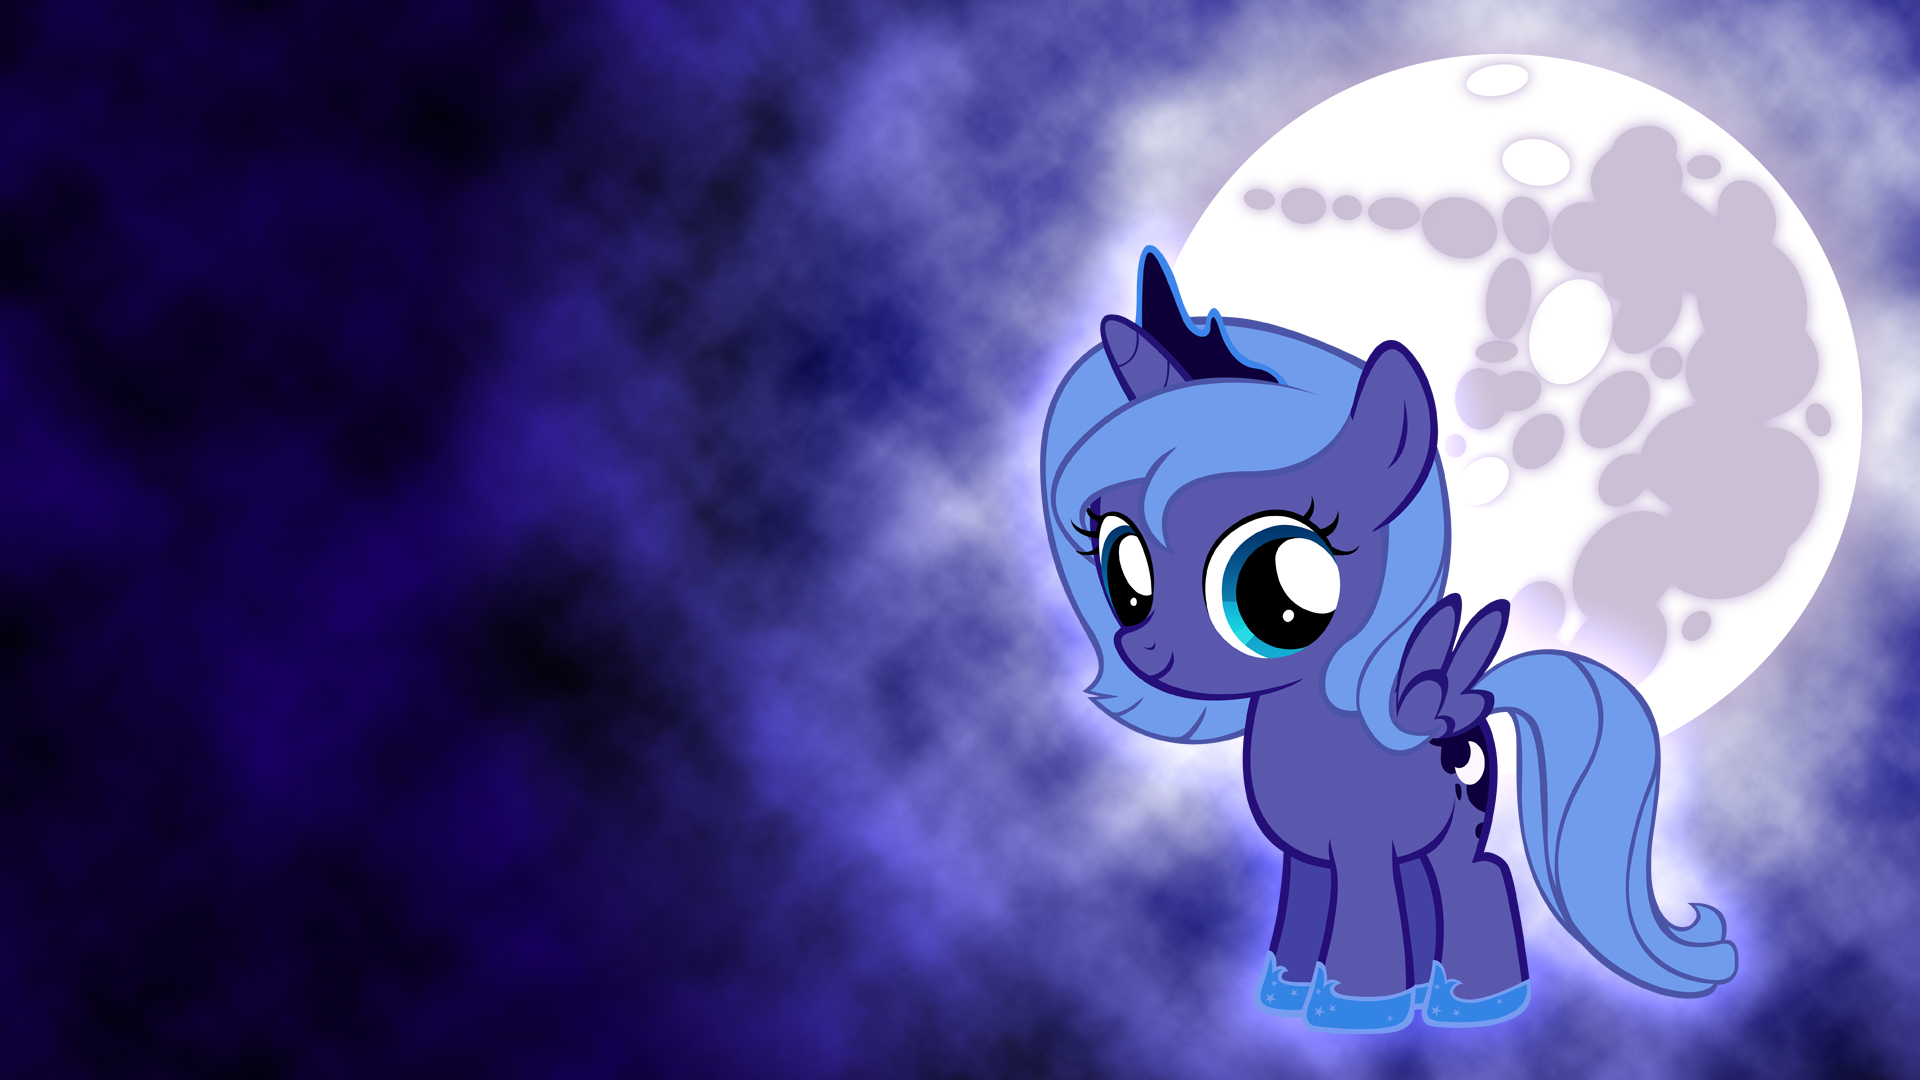 Filly Luna Wallpaper v2 by MoongazePonies, Pappkarton and SpiritofthwWolf